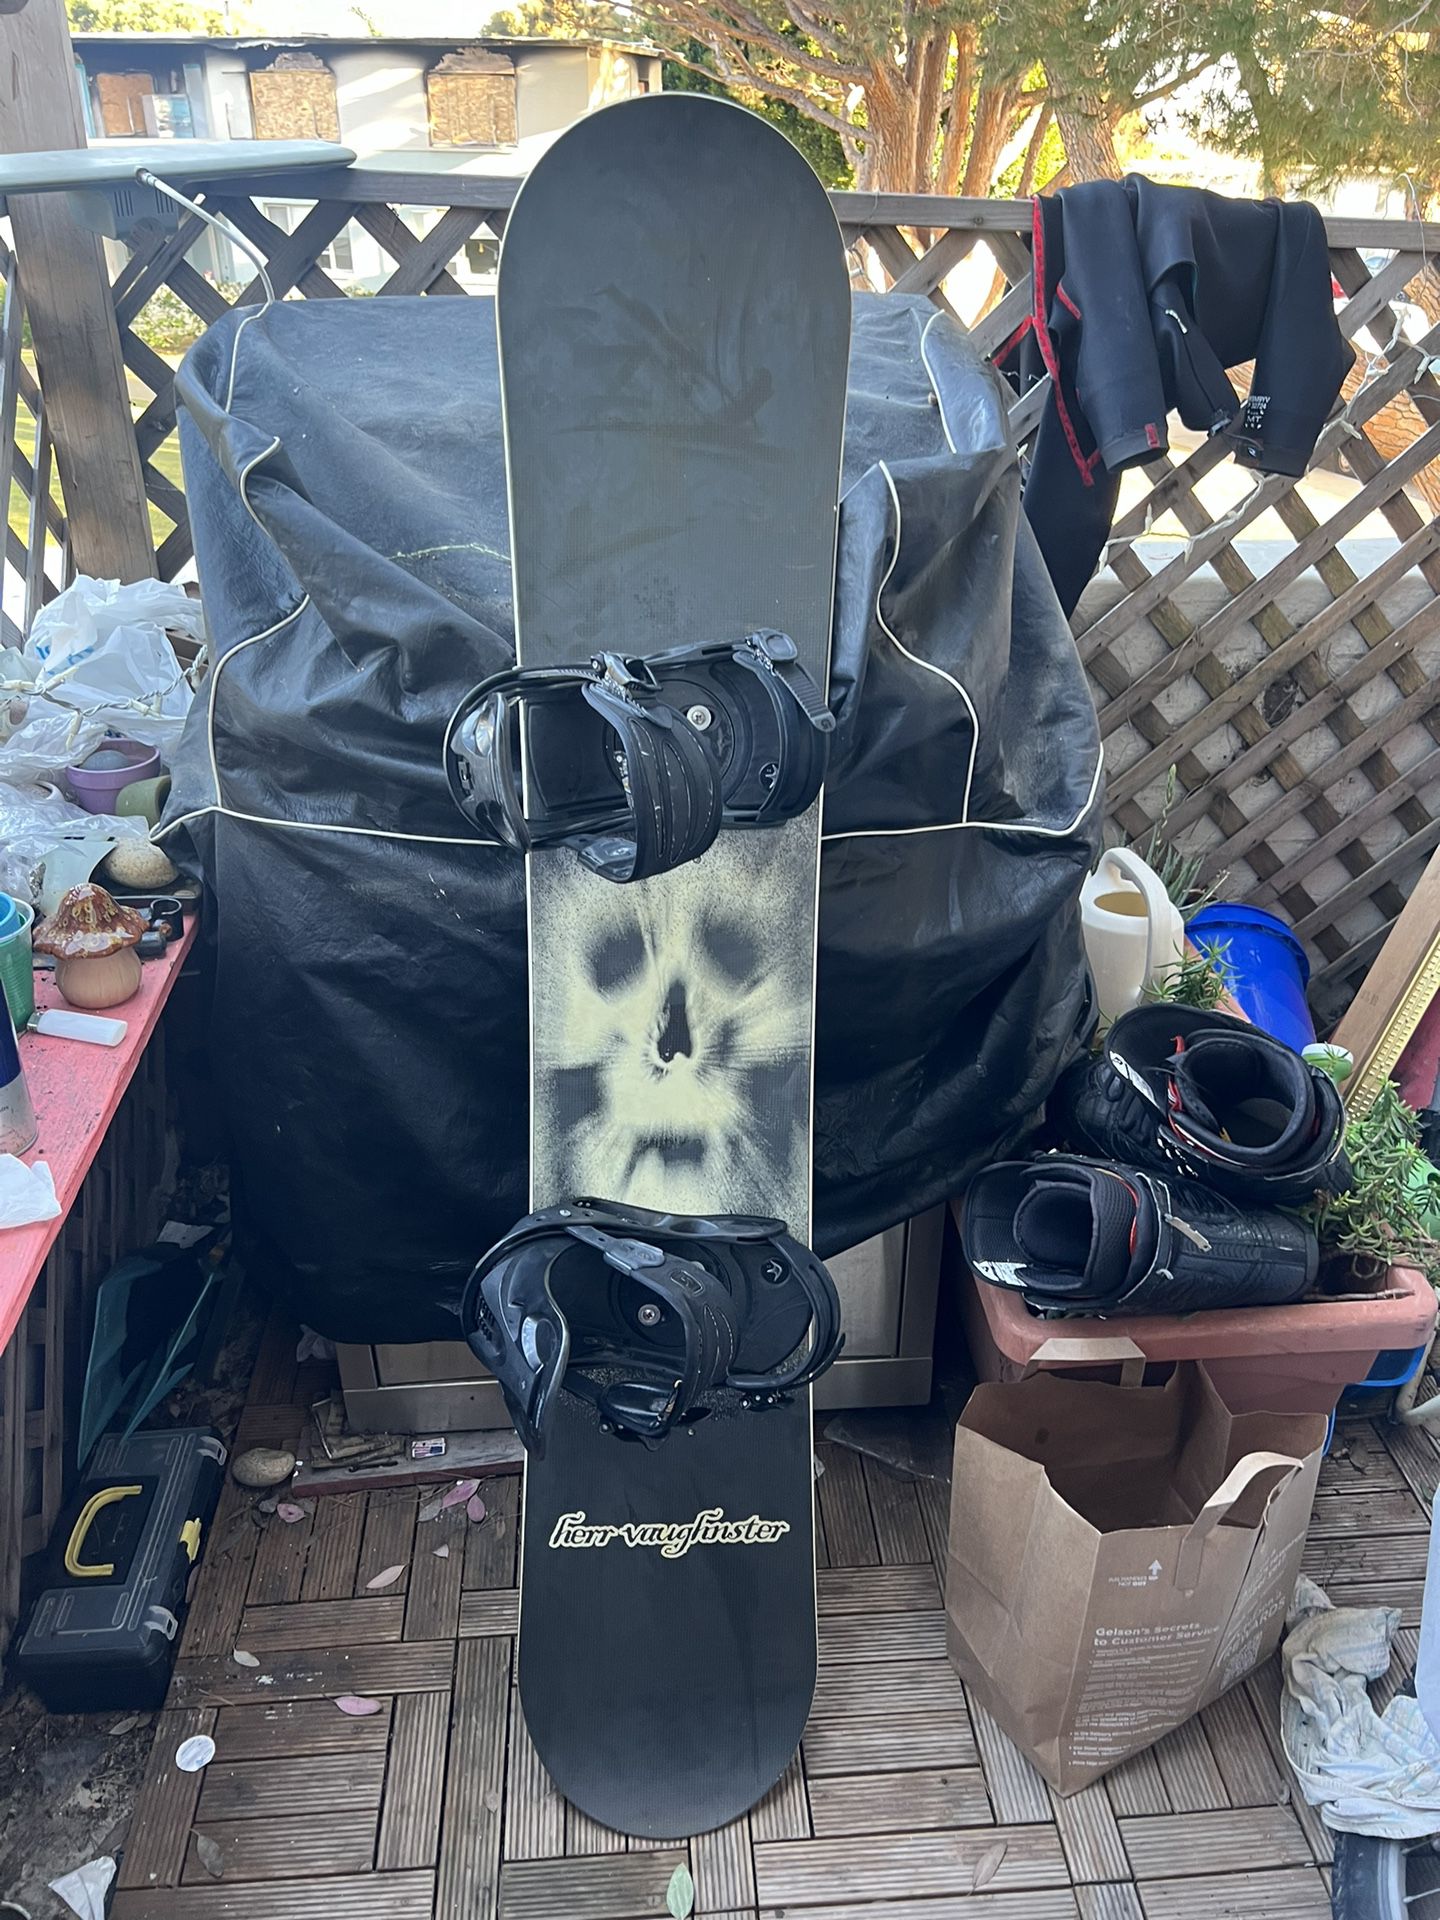 Custom Carbon Fiber 151cm 150cm Snowboard With Burton Bindings Demon Backpack Snowboard Bag Also Available And 152cm K2 Zeppelin For $100